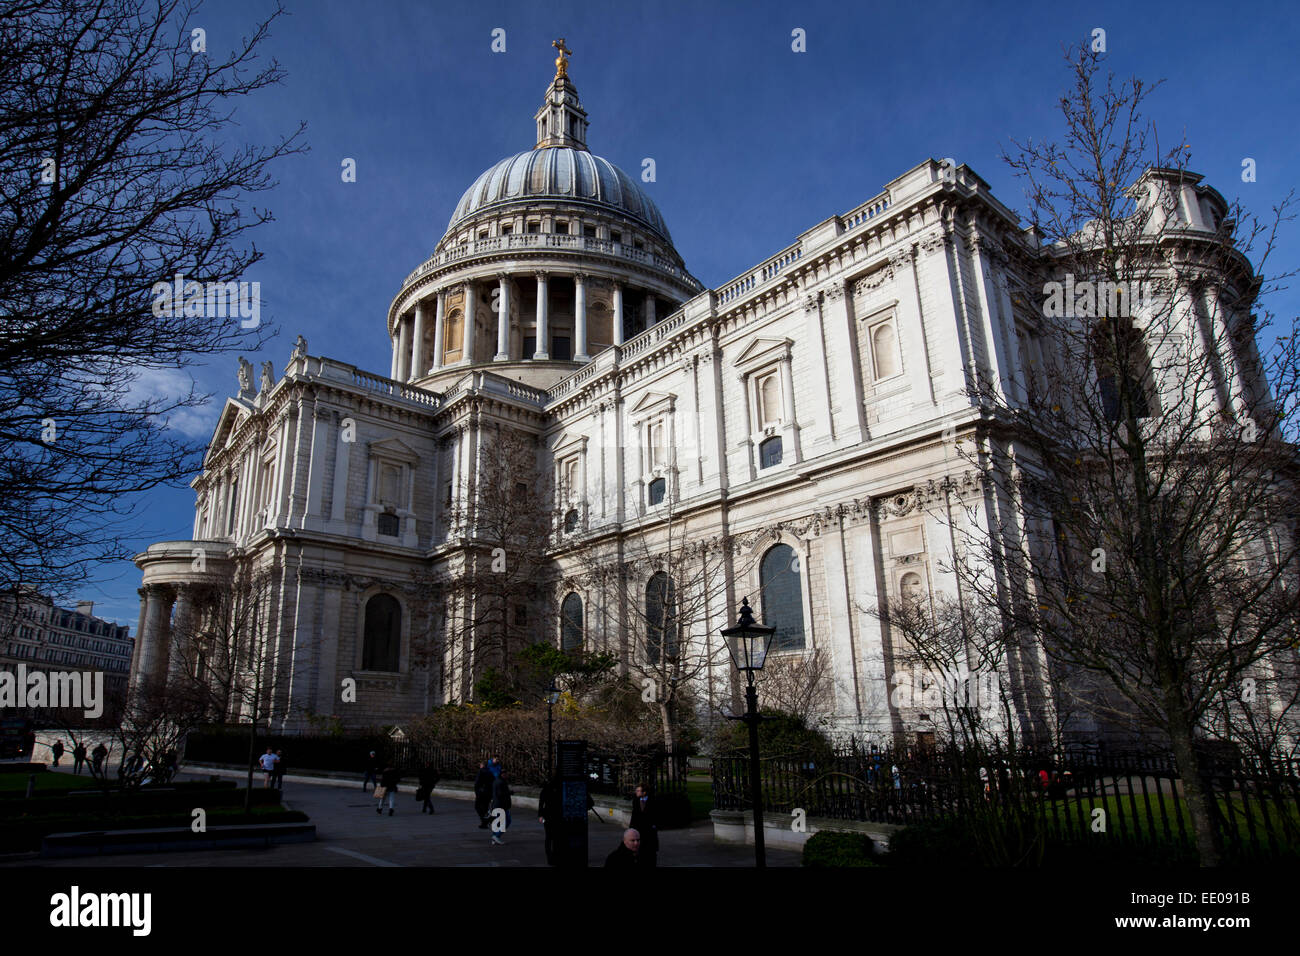 London, England, January 2015, A landscape view of pedestrians walking ourside St Paul's Cathedral during winter. Stock Photo